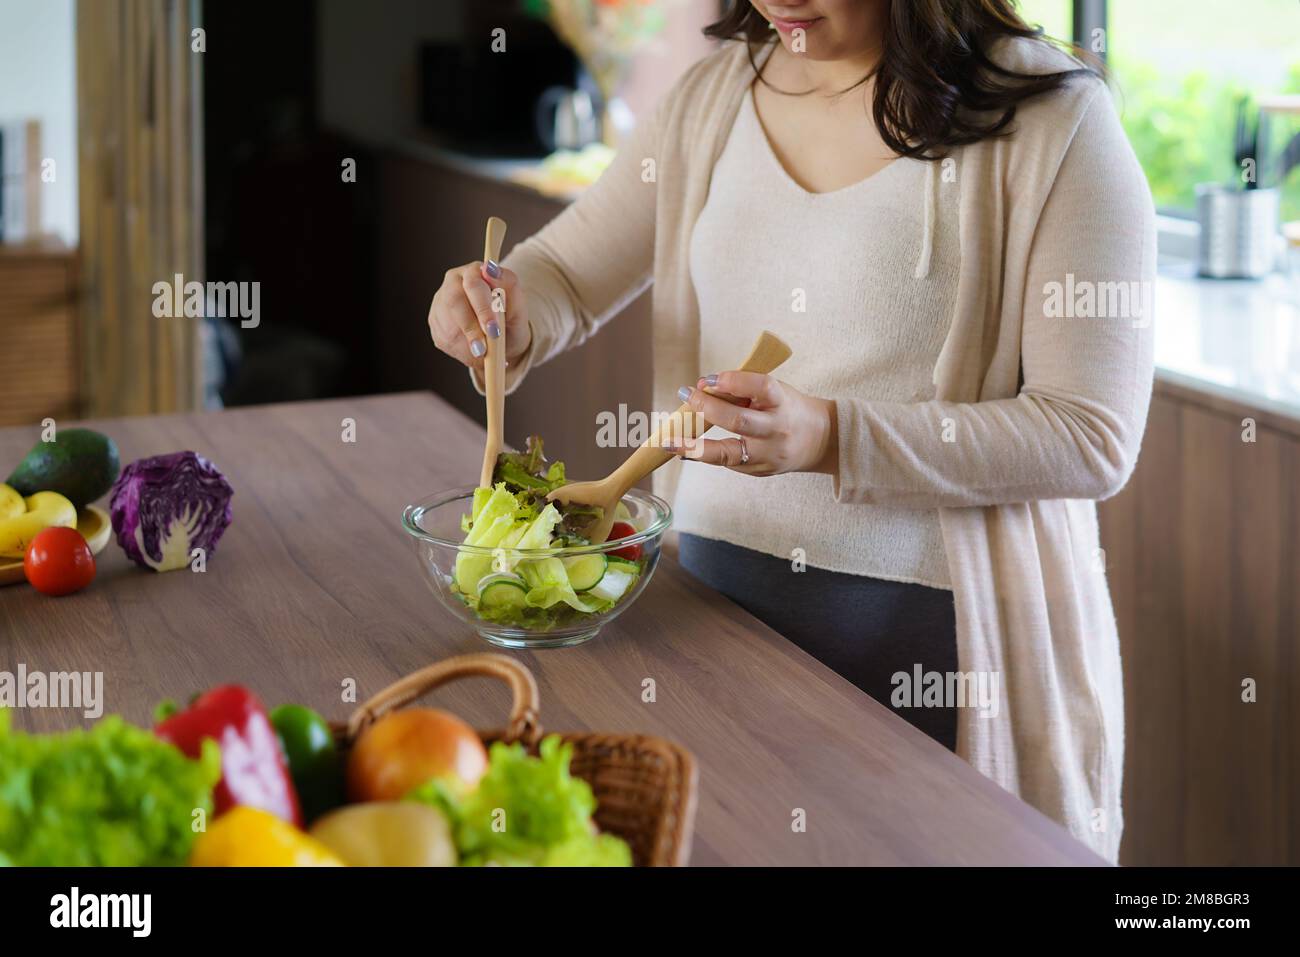 Beautiful Asian Pregnant Woman Happily Preparing a Vegetable Salad, Organic Healthy Food, in a Cozy Home Kitchen. Stock Photo